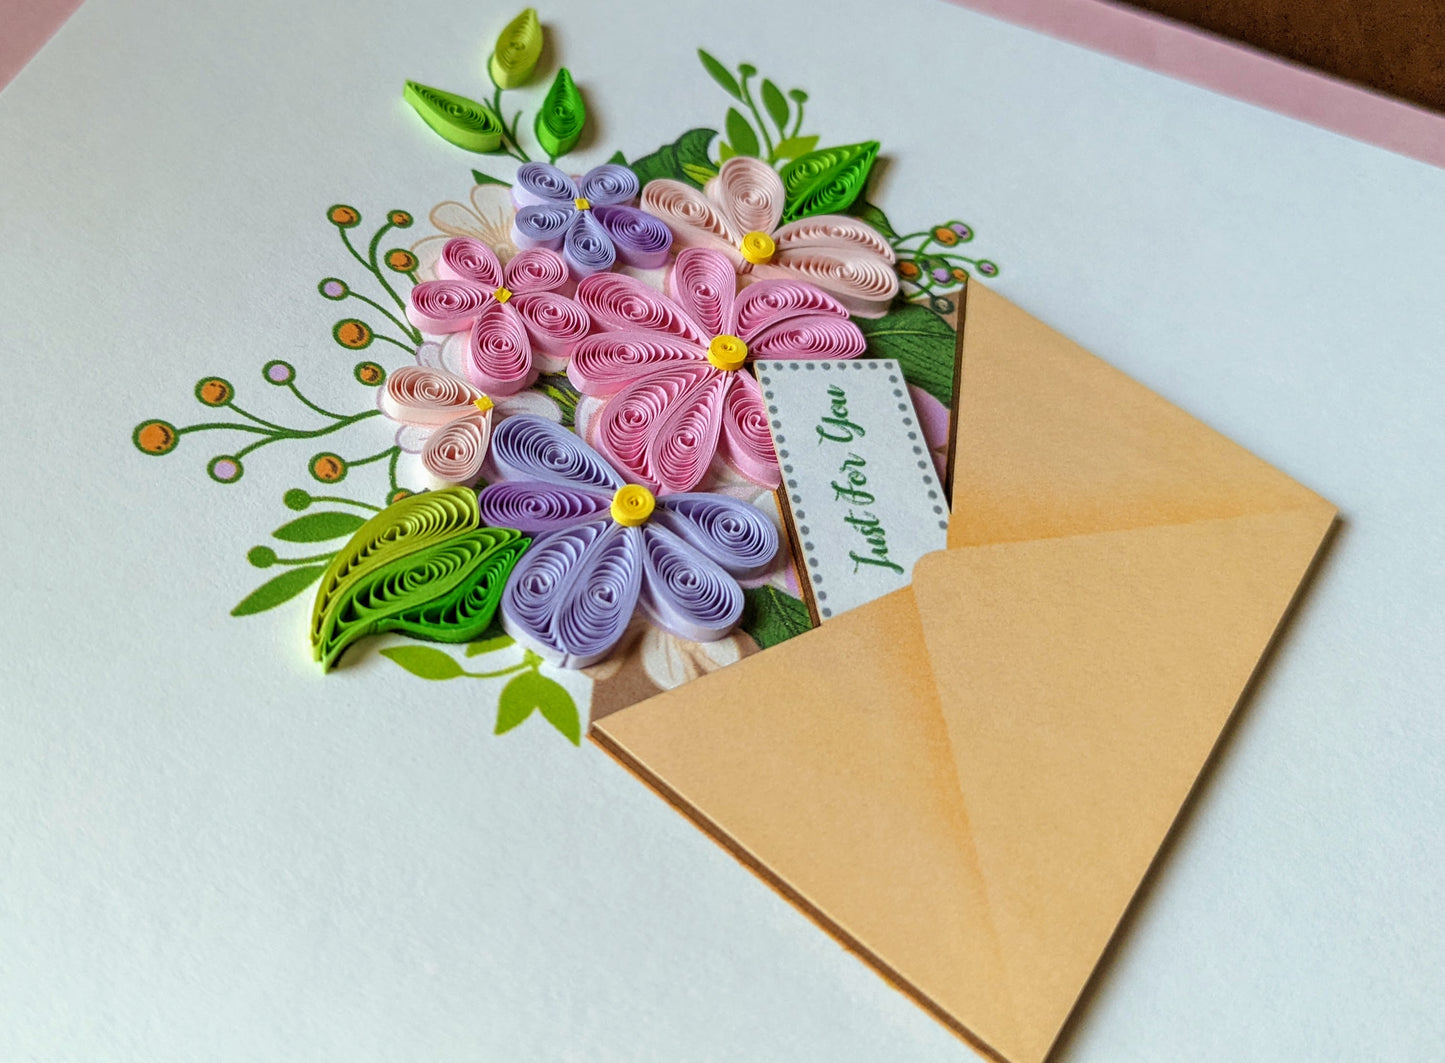 Just for You Floral Envelope Quilled Card